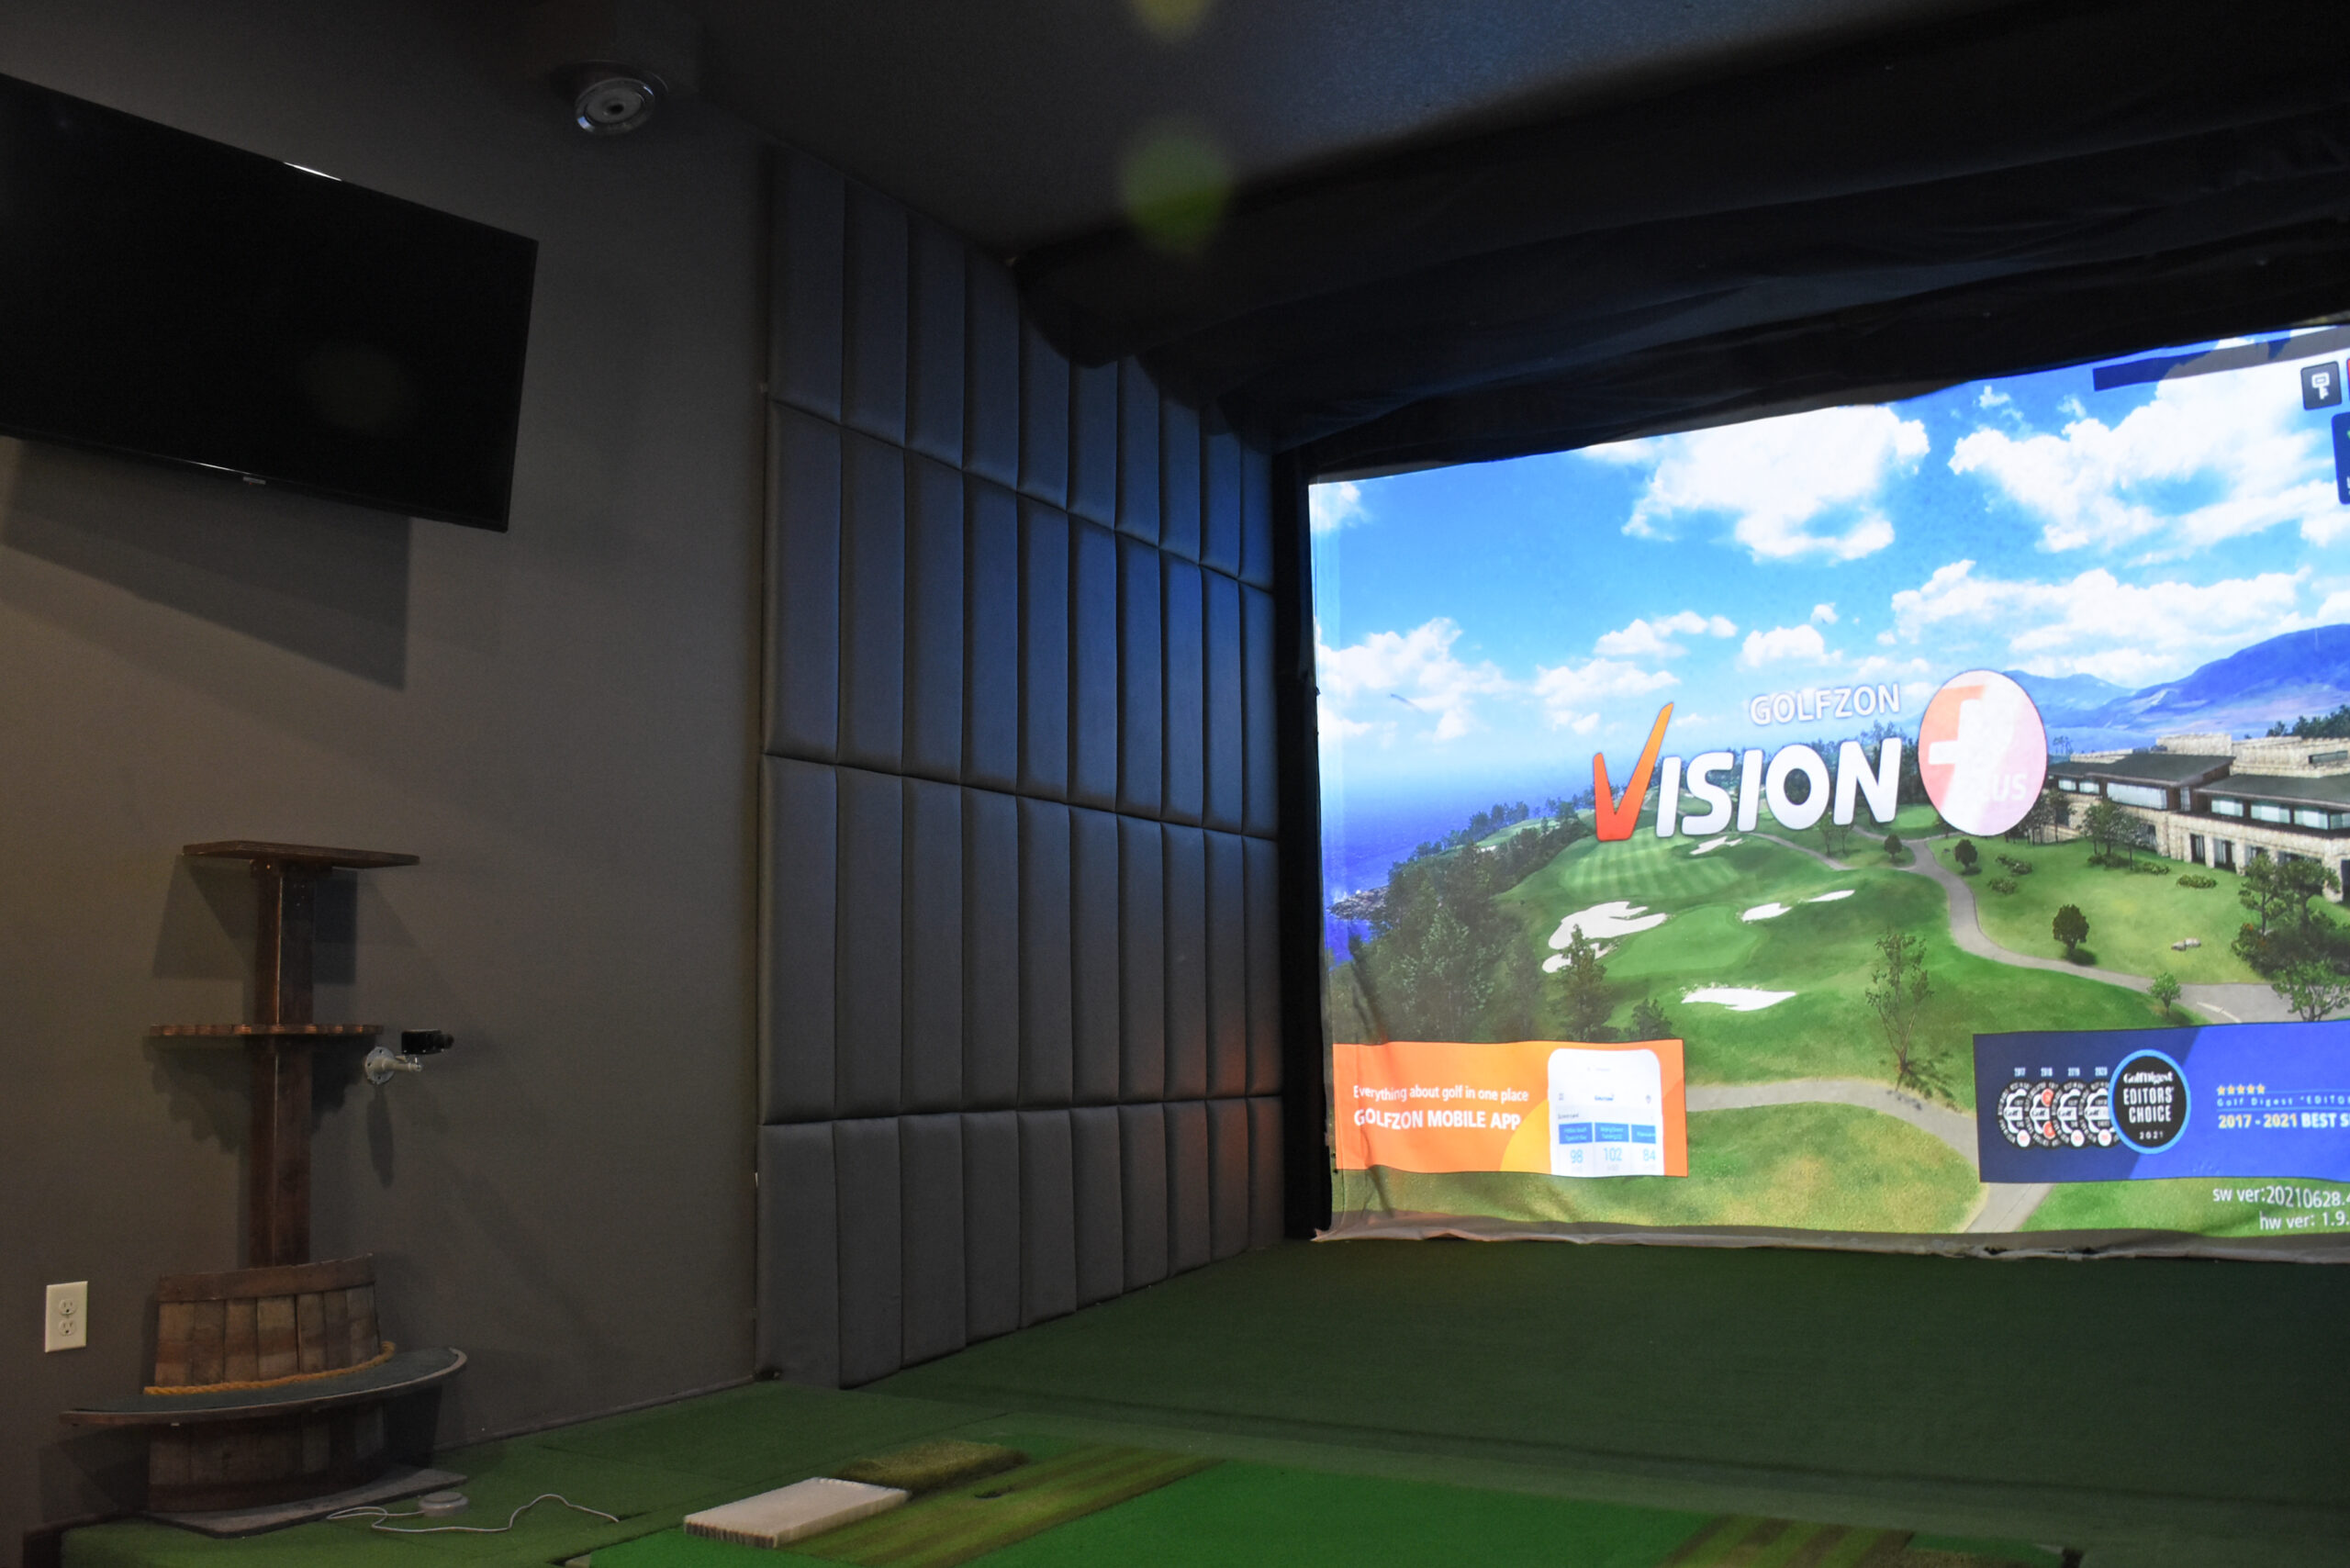 The indoor simulators have contests that you can hold for fun